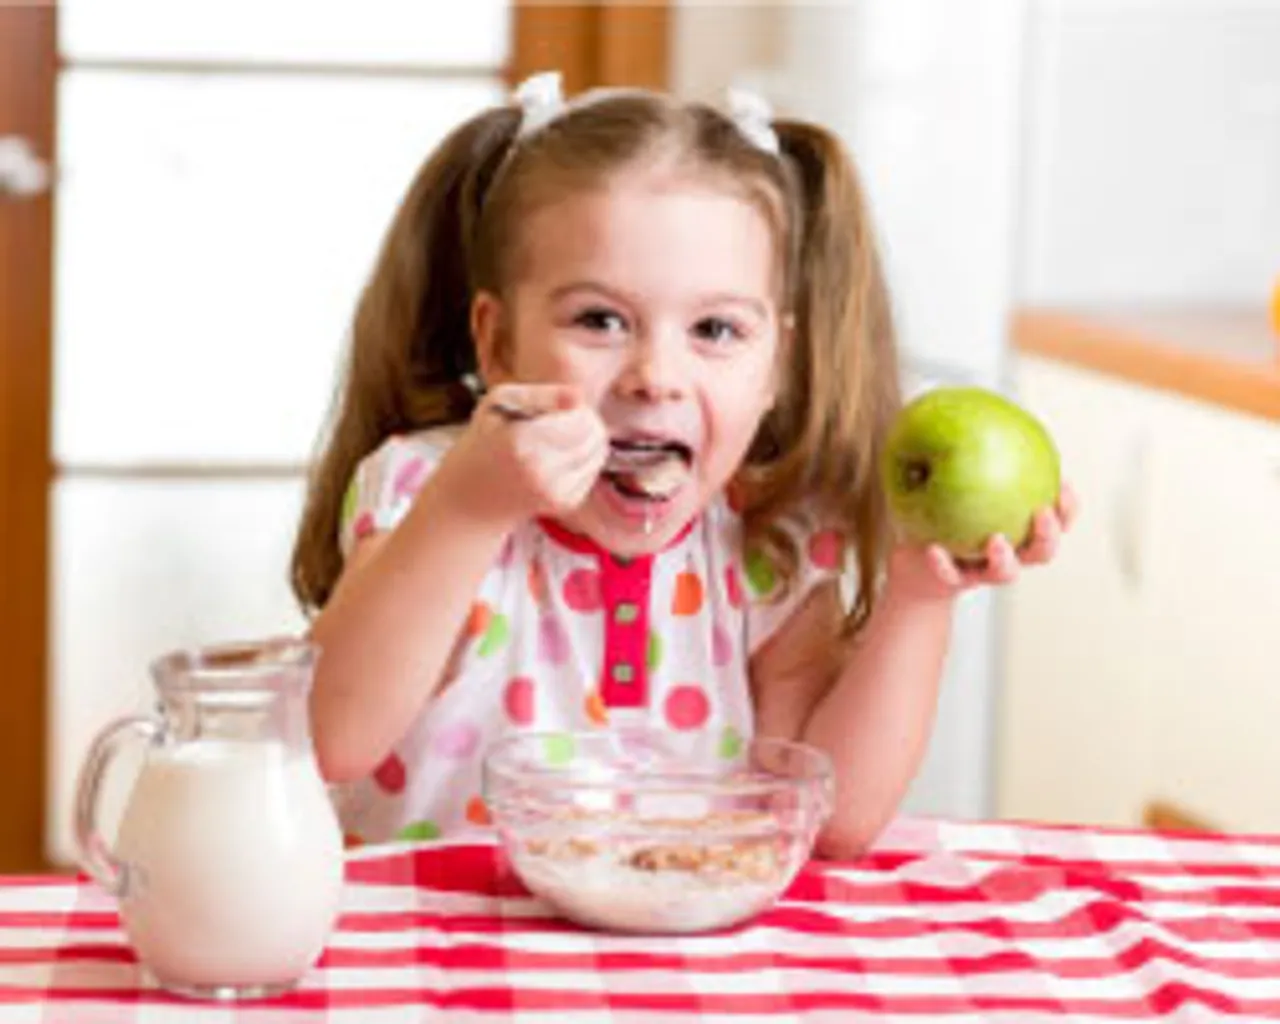 Little girl eating cereal and holding a green apple